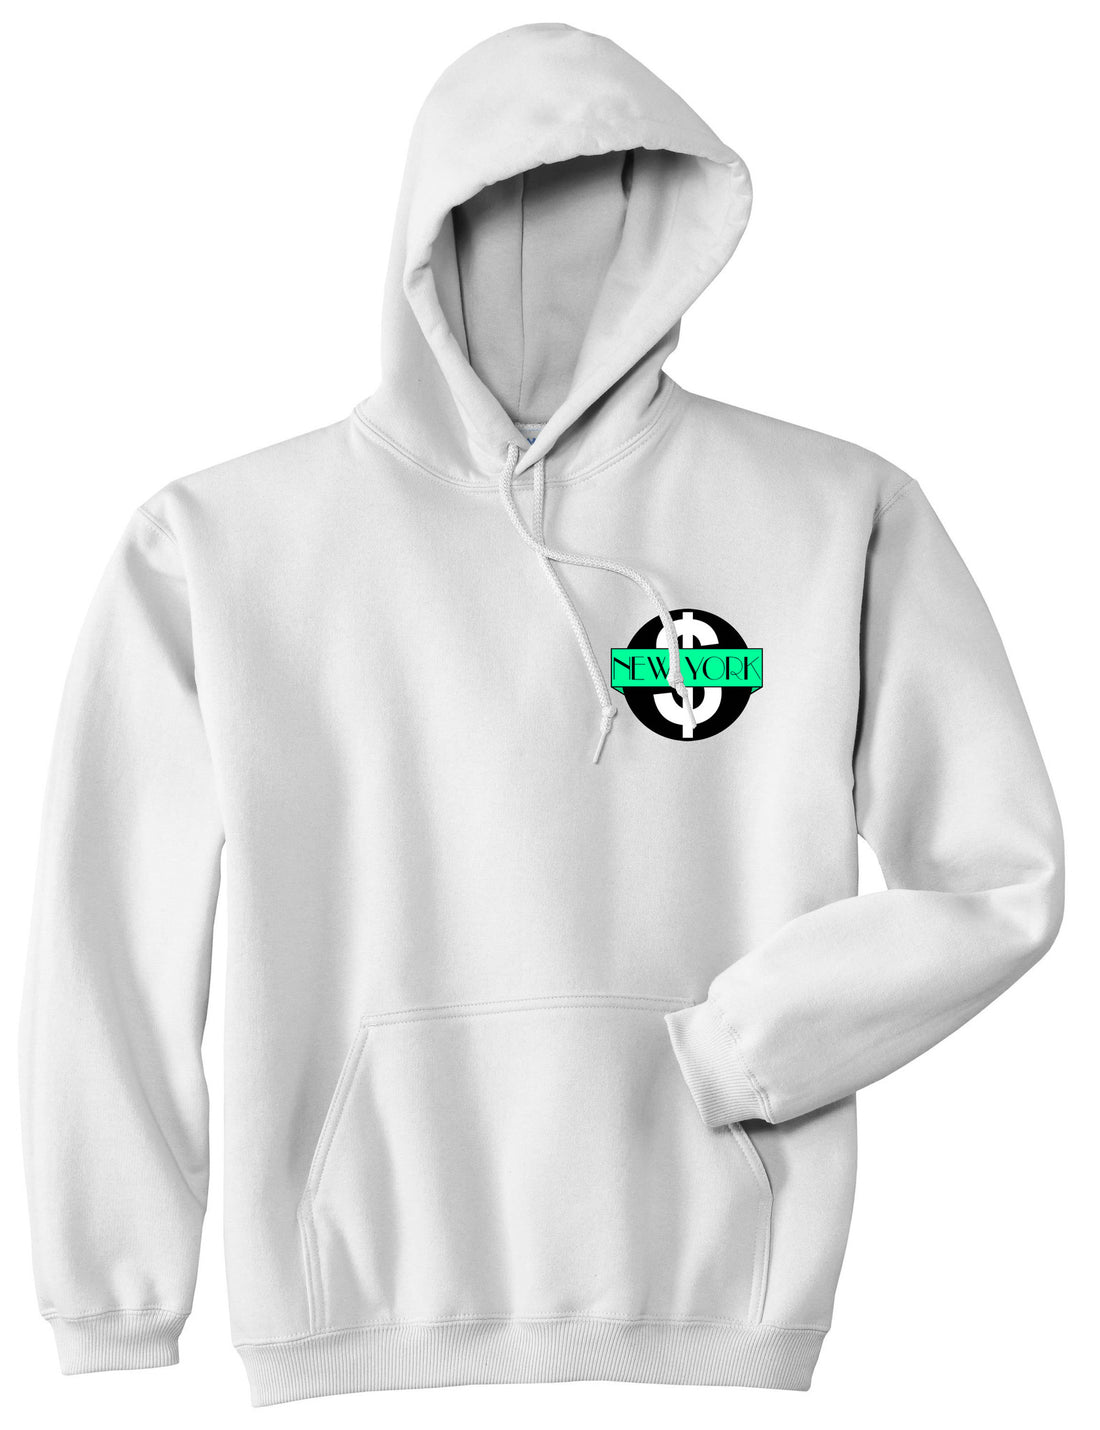 New York Mint Chest Logo Pullover Hoodie in White By Kings Of NY